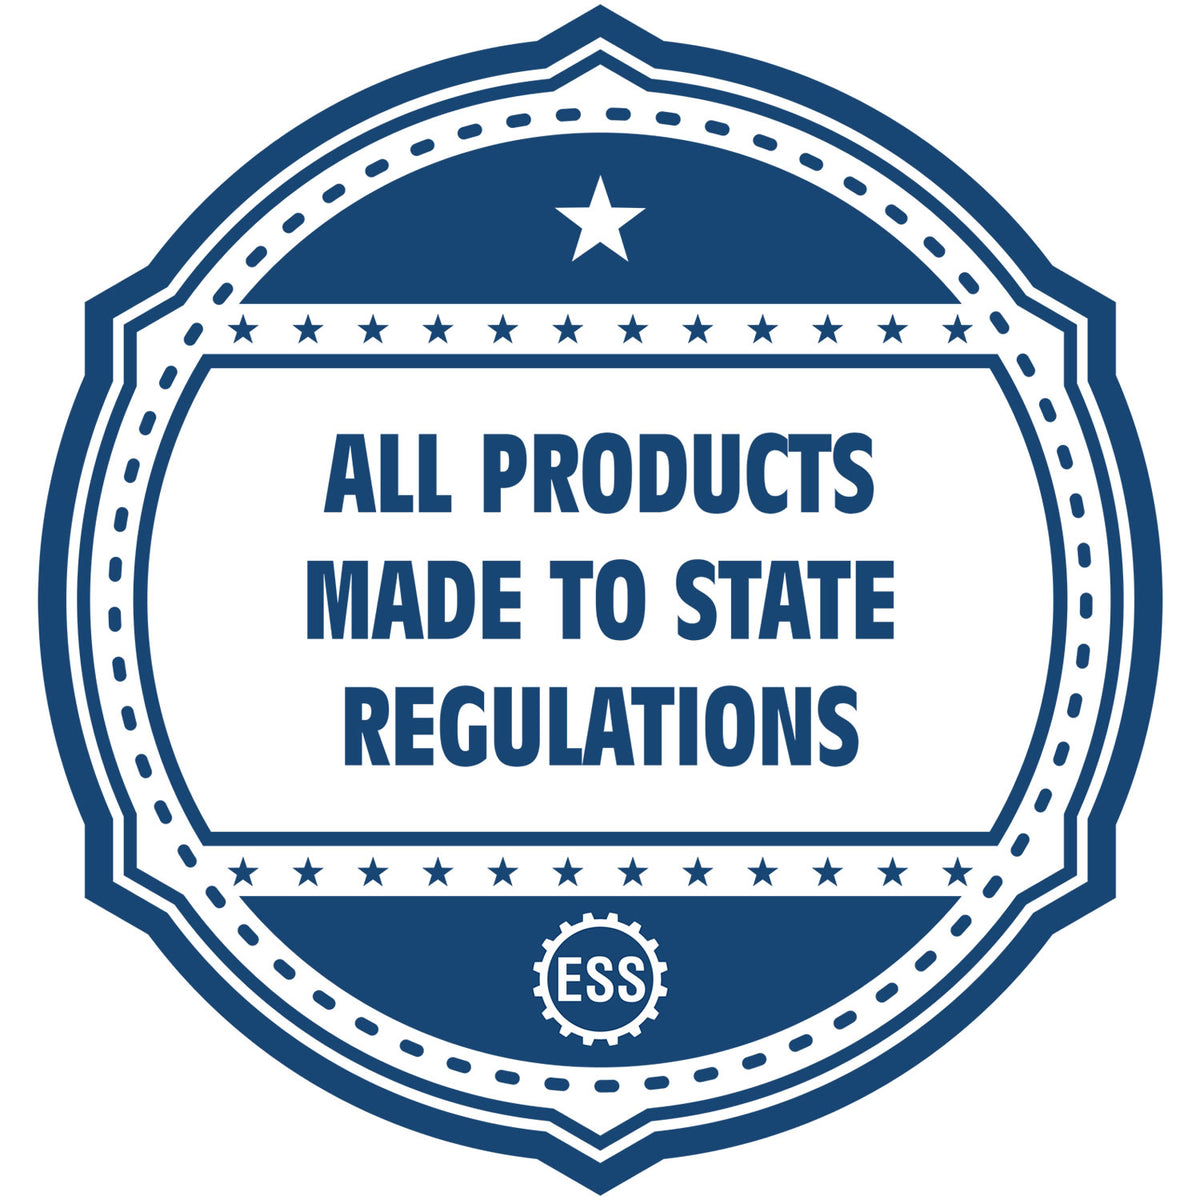 An icon or badge element for the State of Indiana Architectural Seal Embosser showing that this product is made in compliance with state regulations.